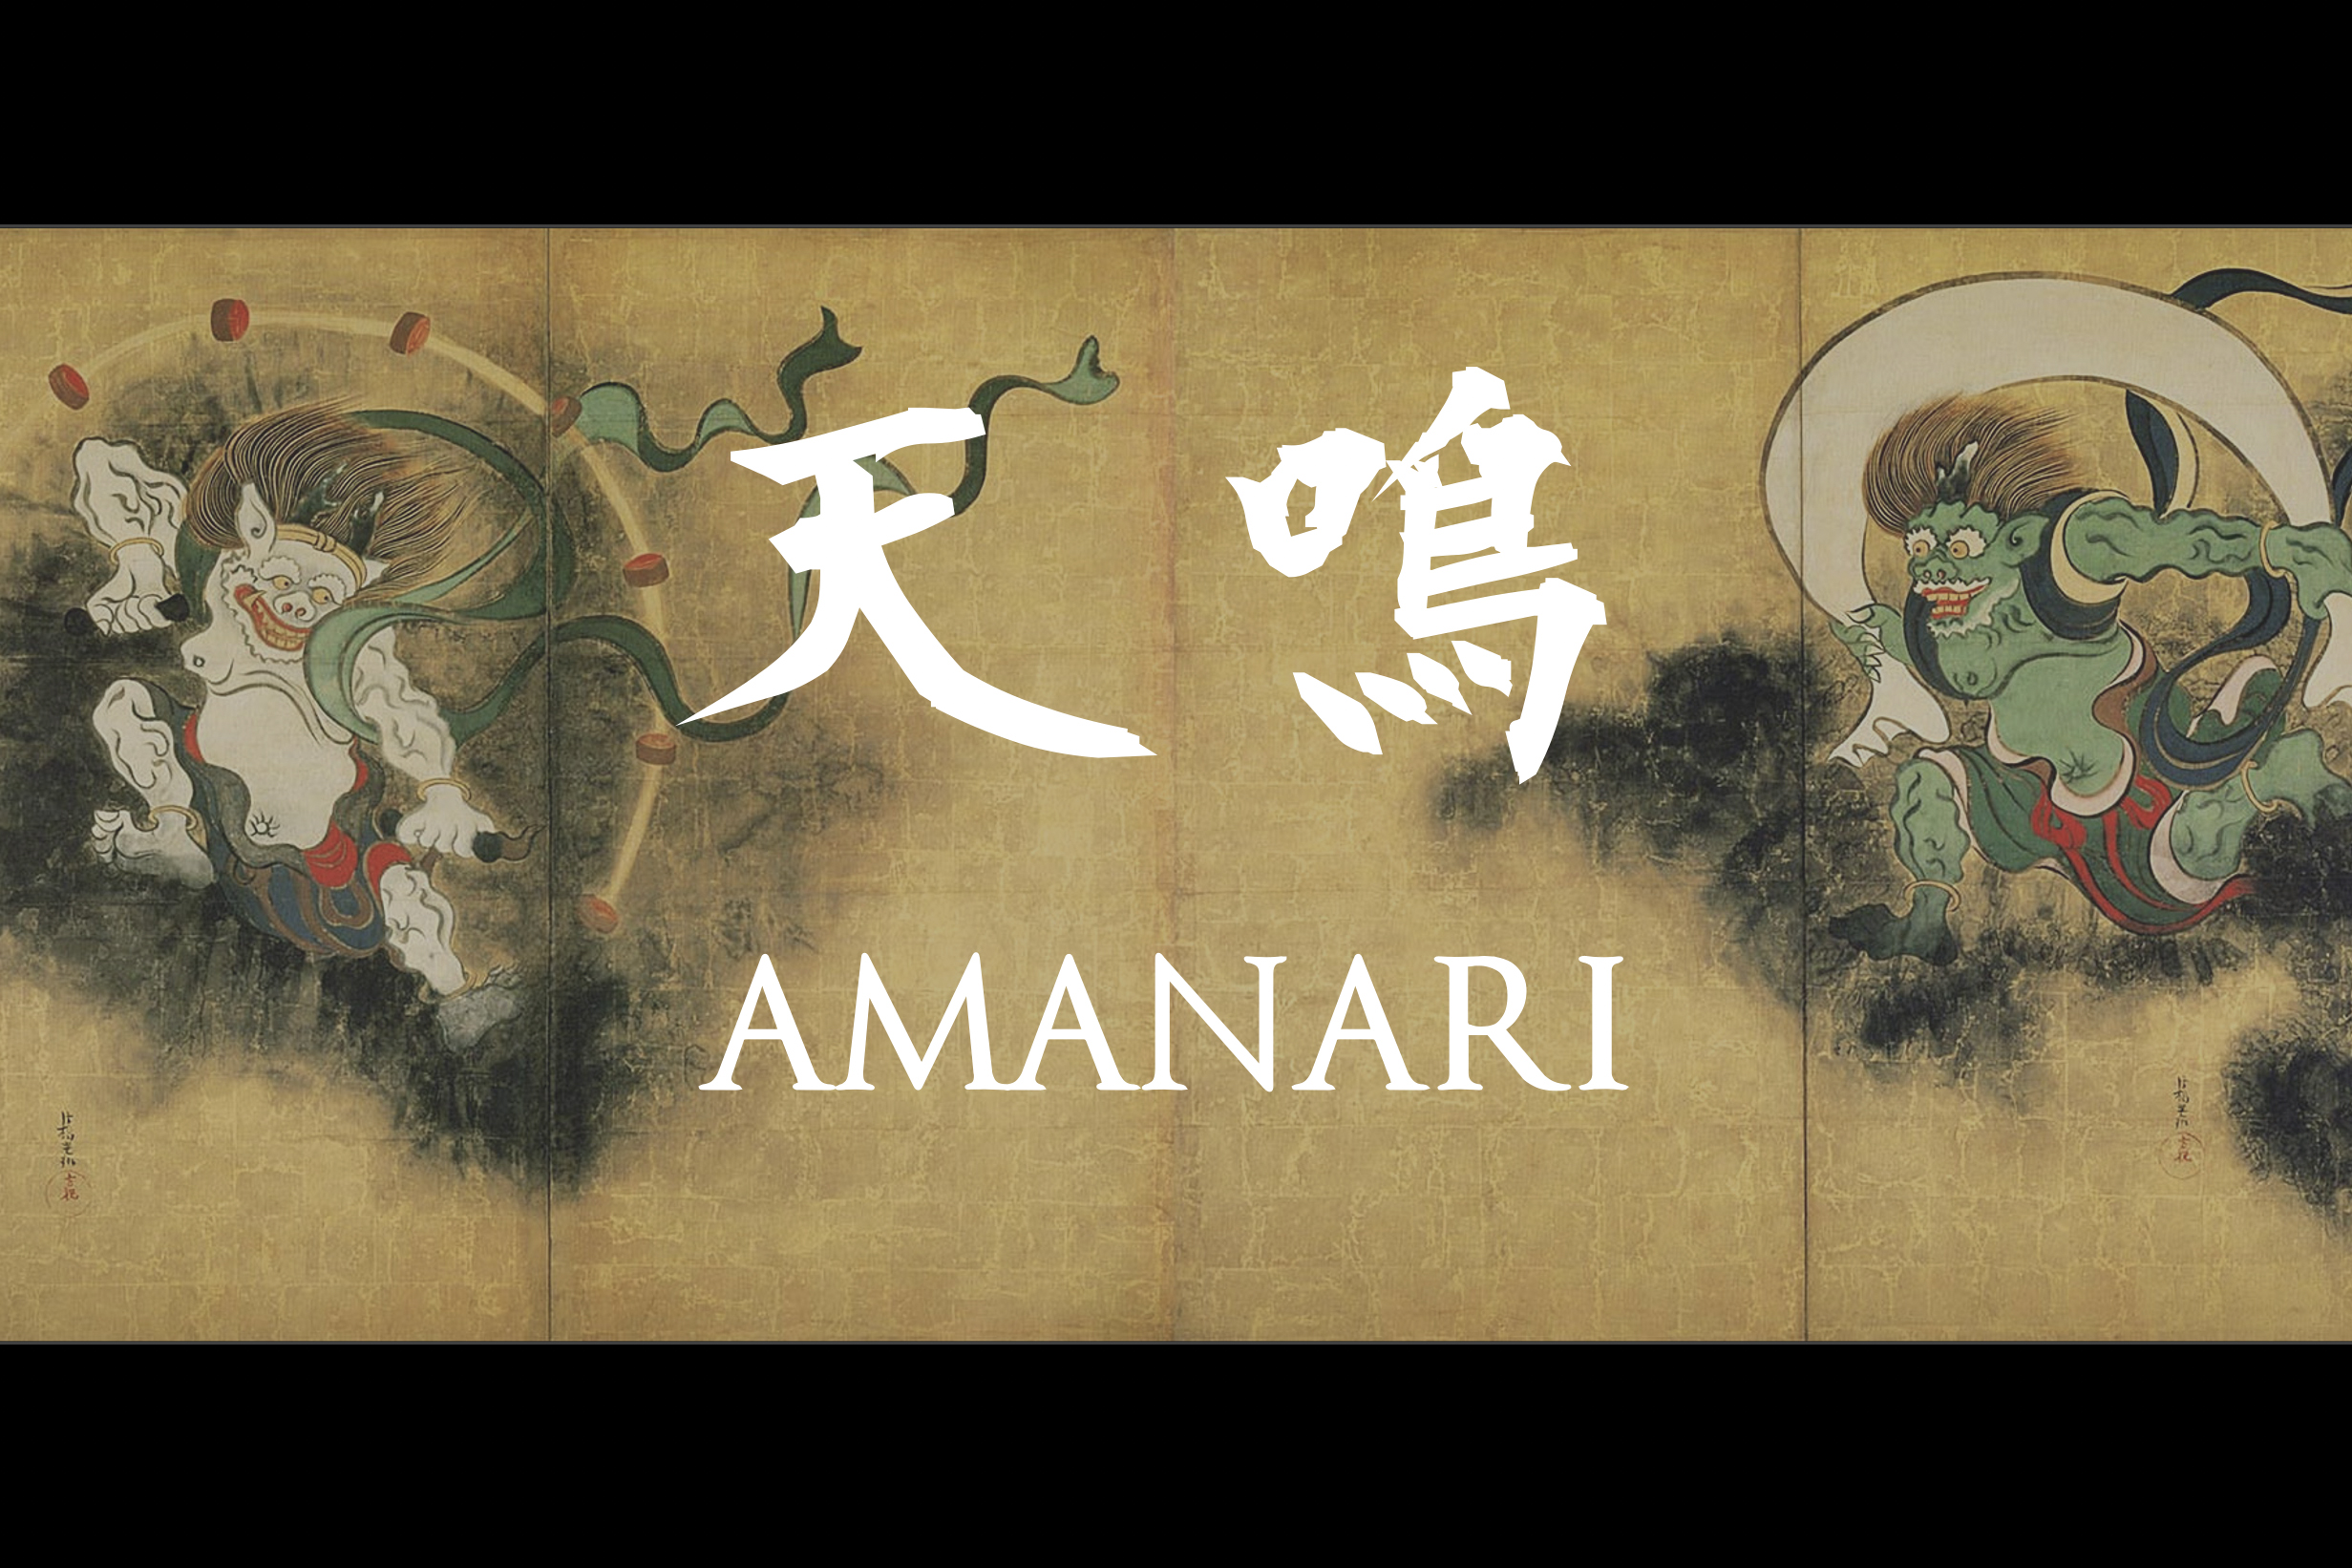 The title of the event on top of a brown Japanese painting with one character on each side